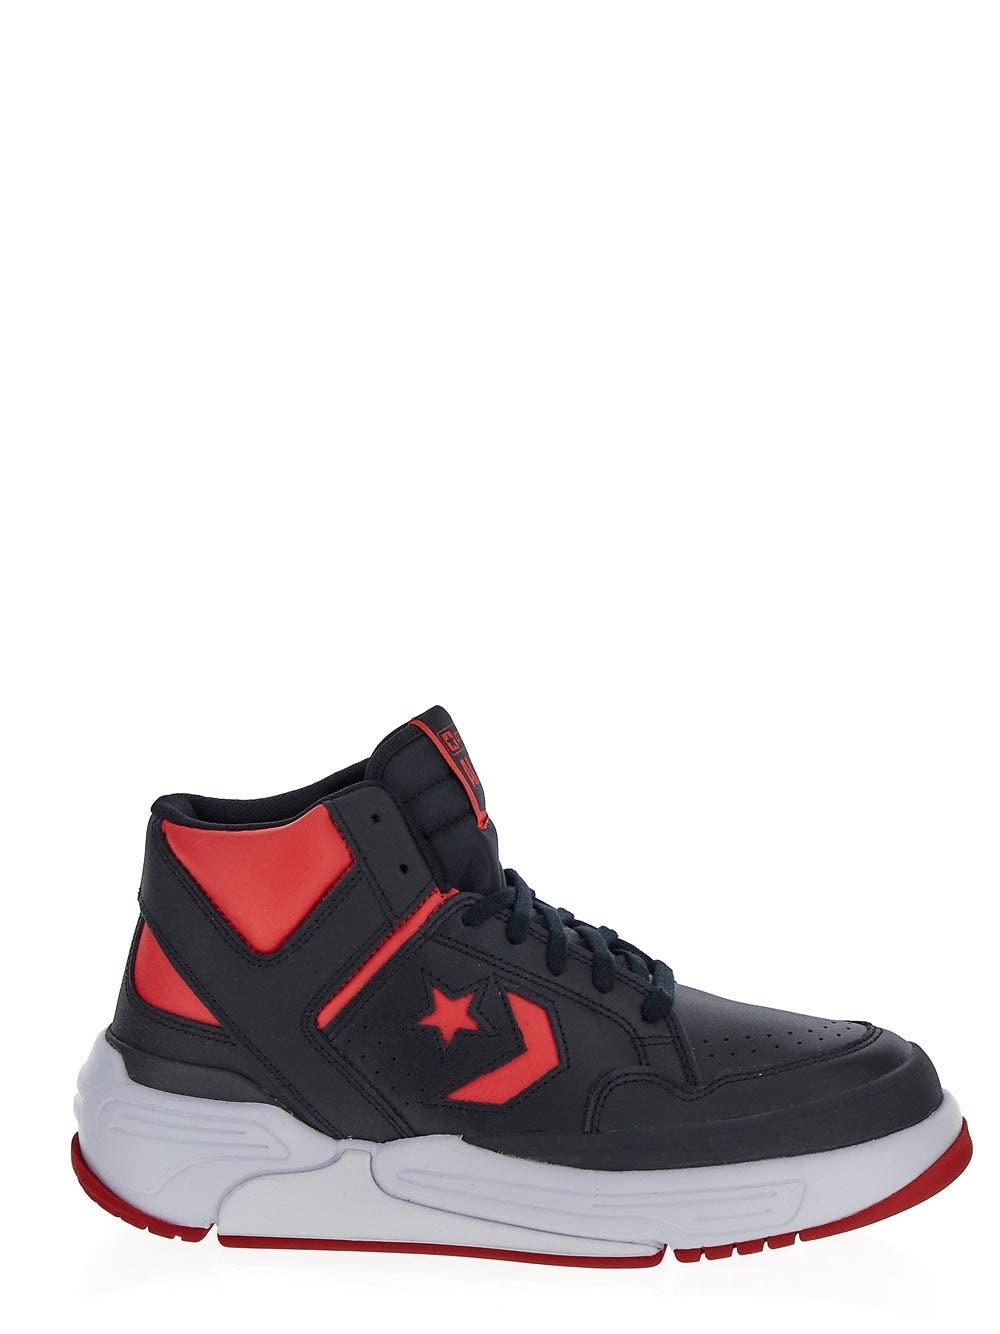 Converse Weapon Colorblocked Leather Sneakers in Black | Lyst